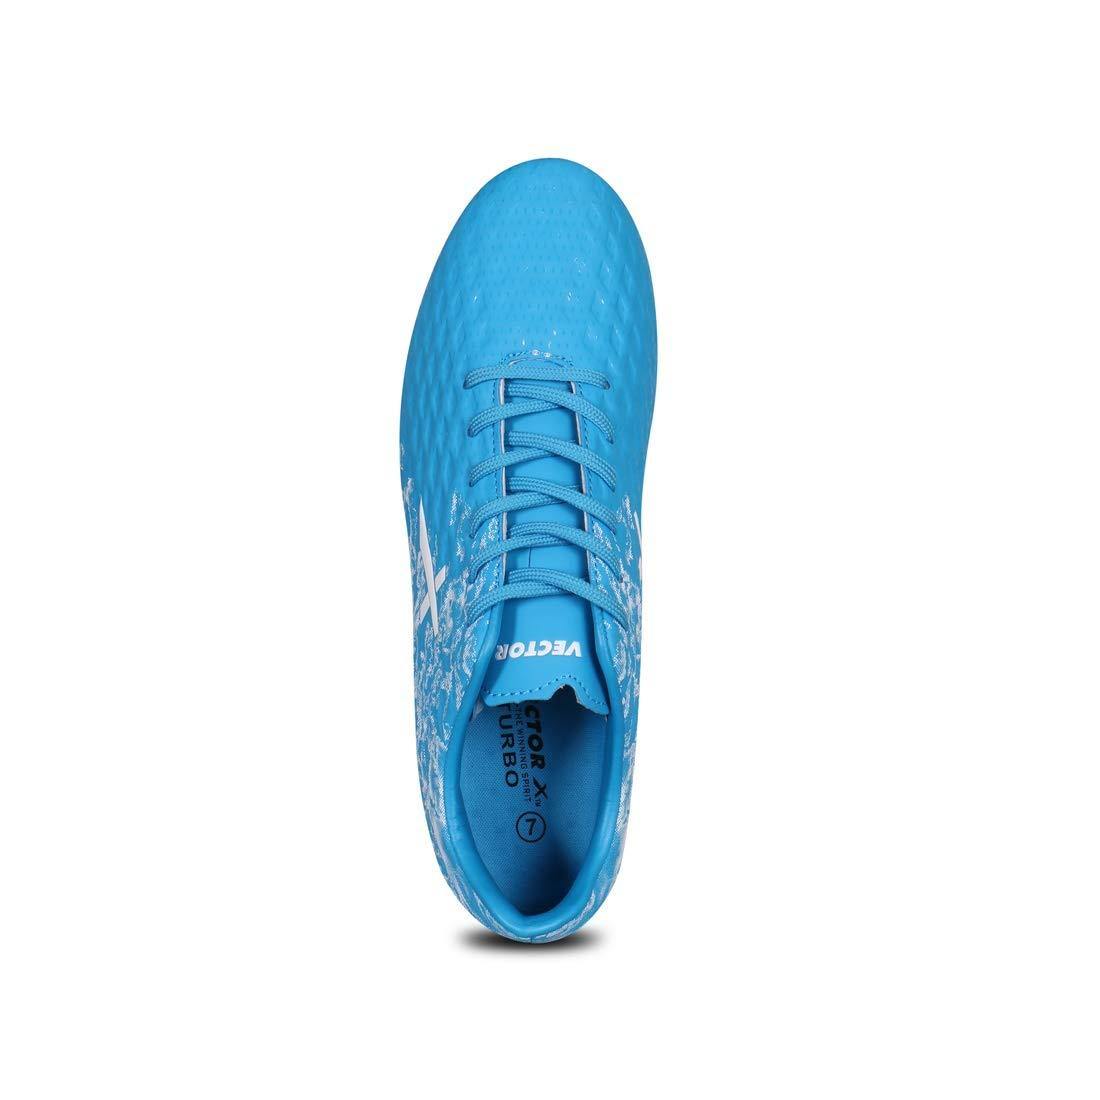 Vector X Turbo Football Shoes, Adult Blue/White - Best Price online Prokicksports.com